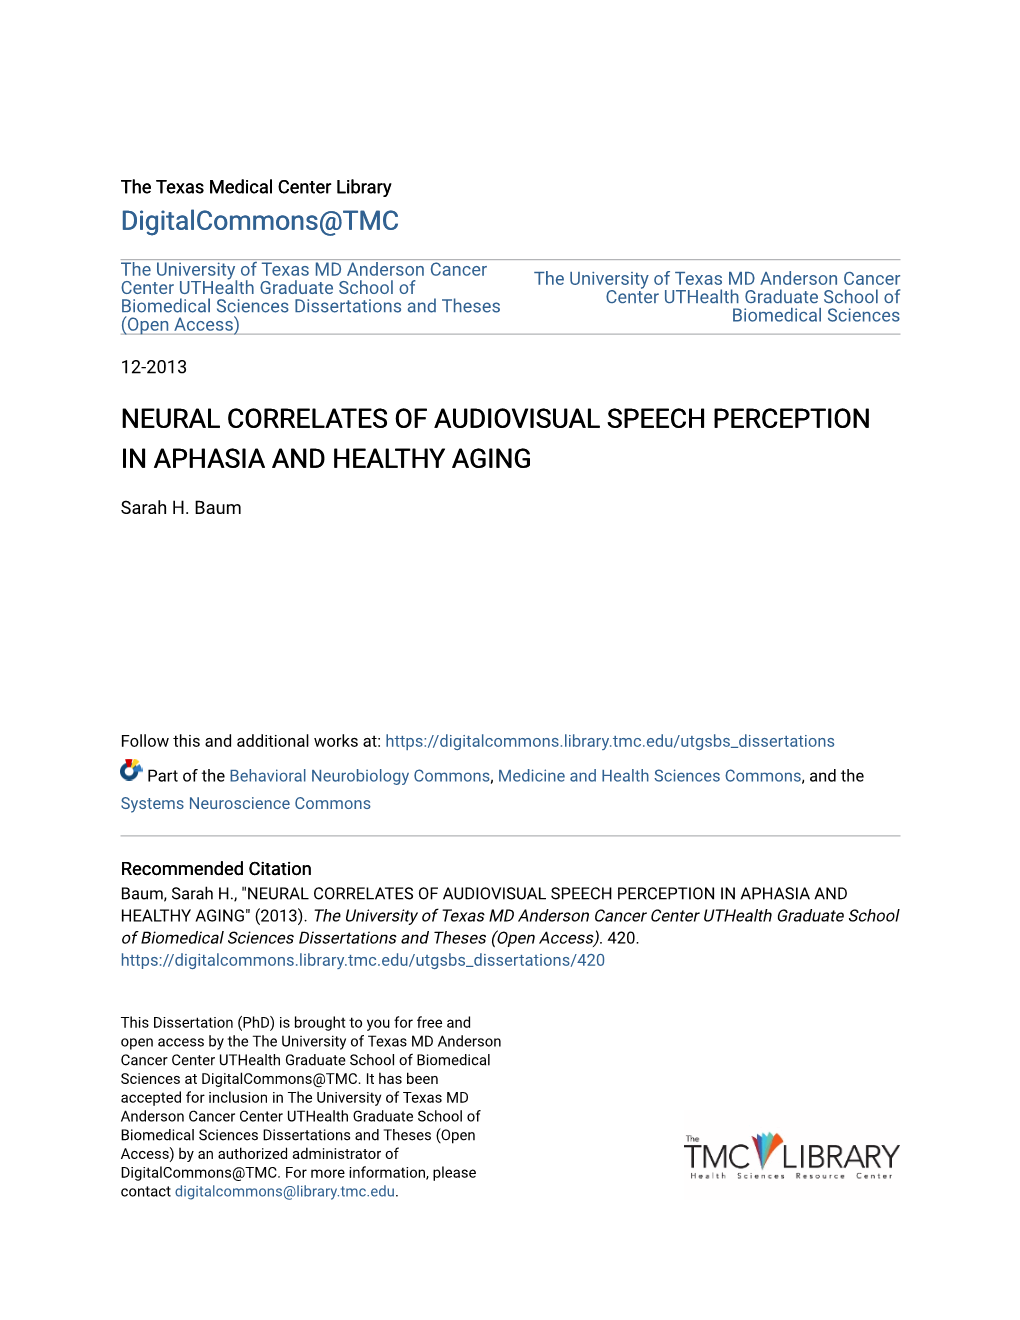 Neural Correlates of Audiovisual Speech Perception in Aphasia and Healthy Aging